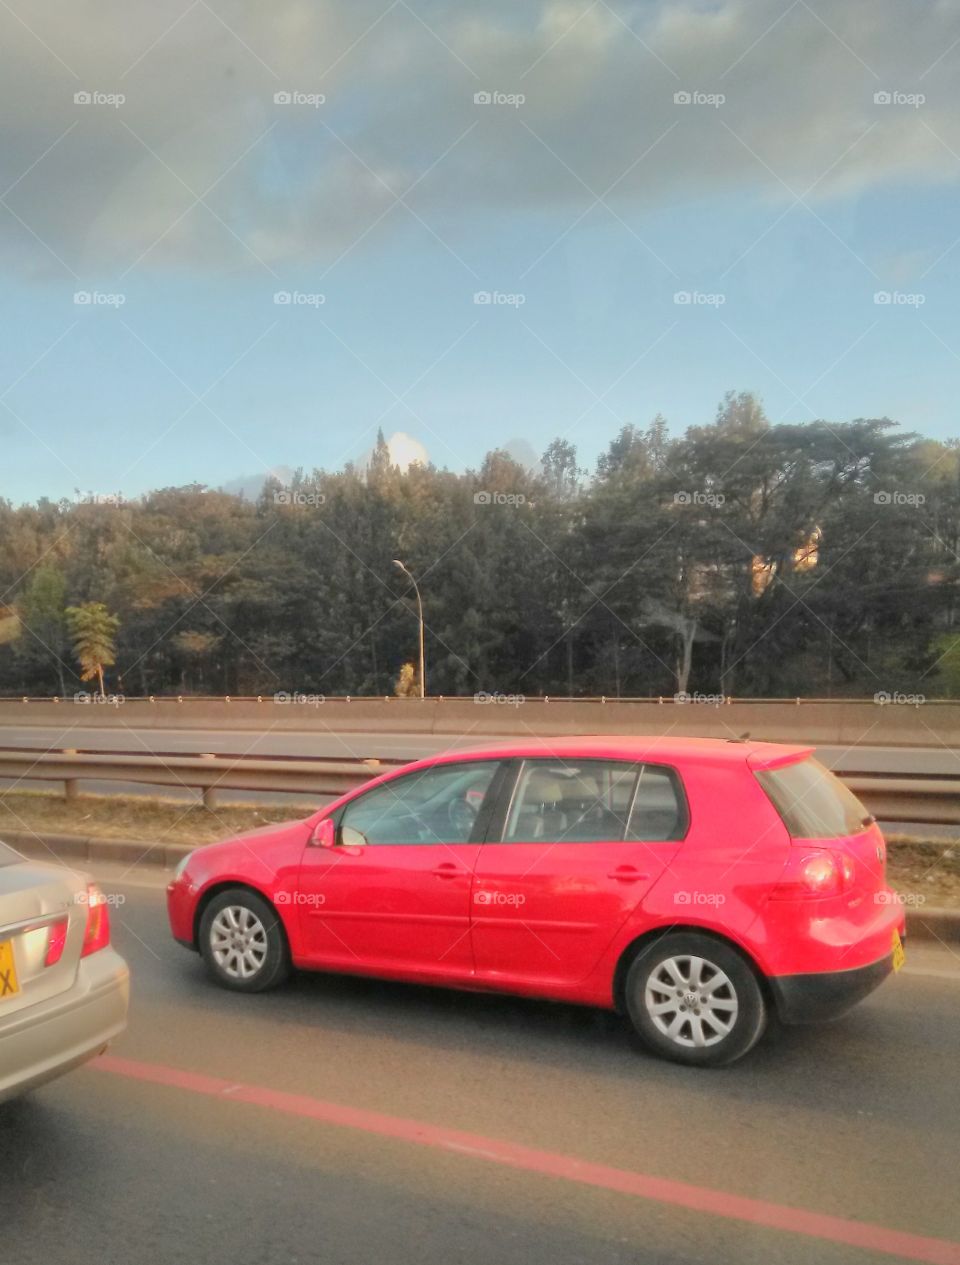 This is a red Volkswagen Golf which is a 4-seater car with an engine capacity ranging from 1400CC onwards.